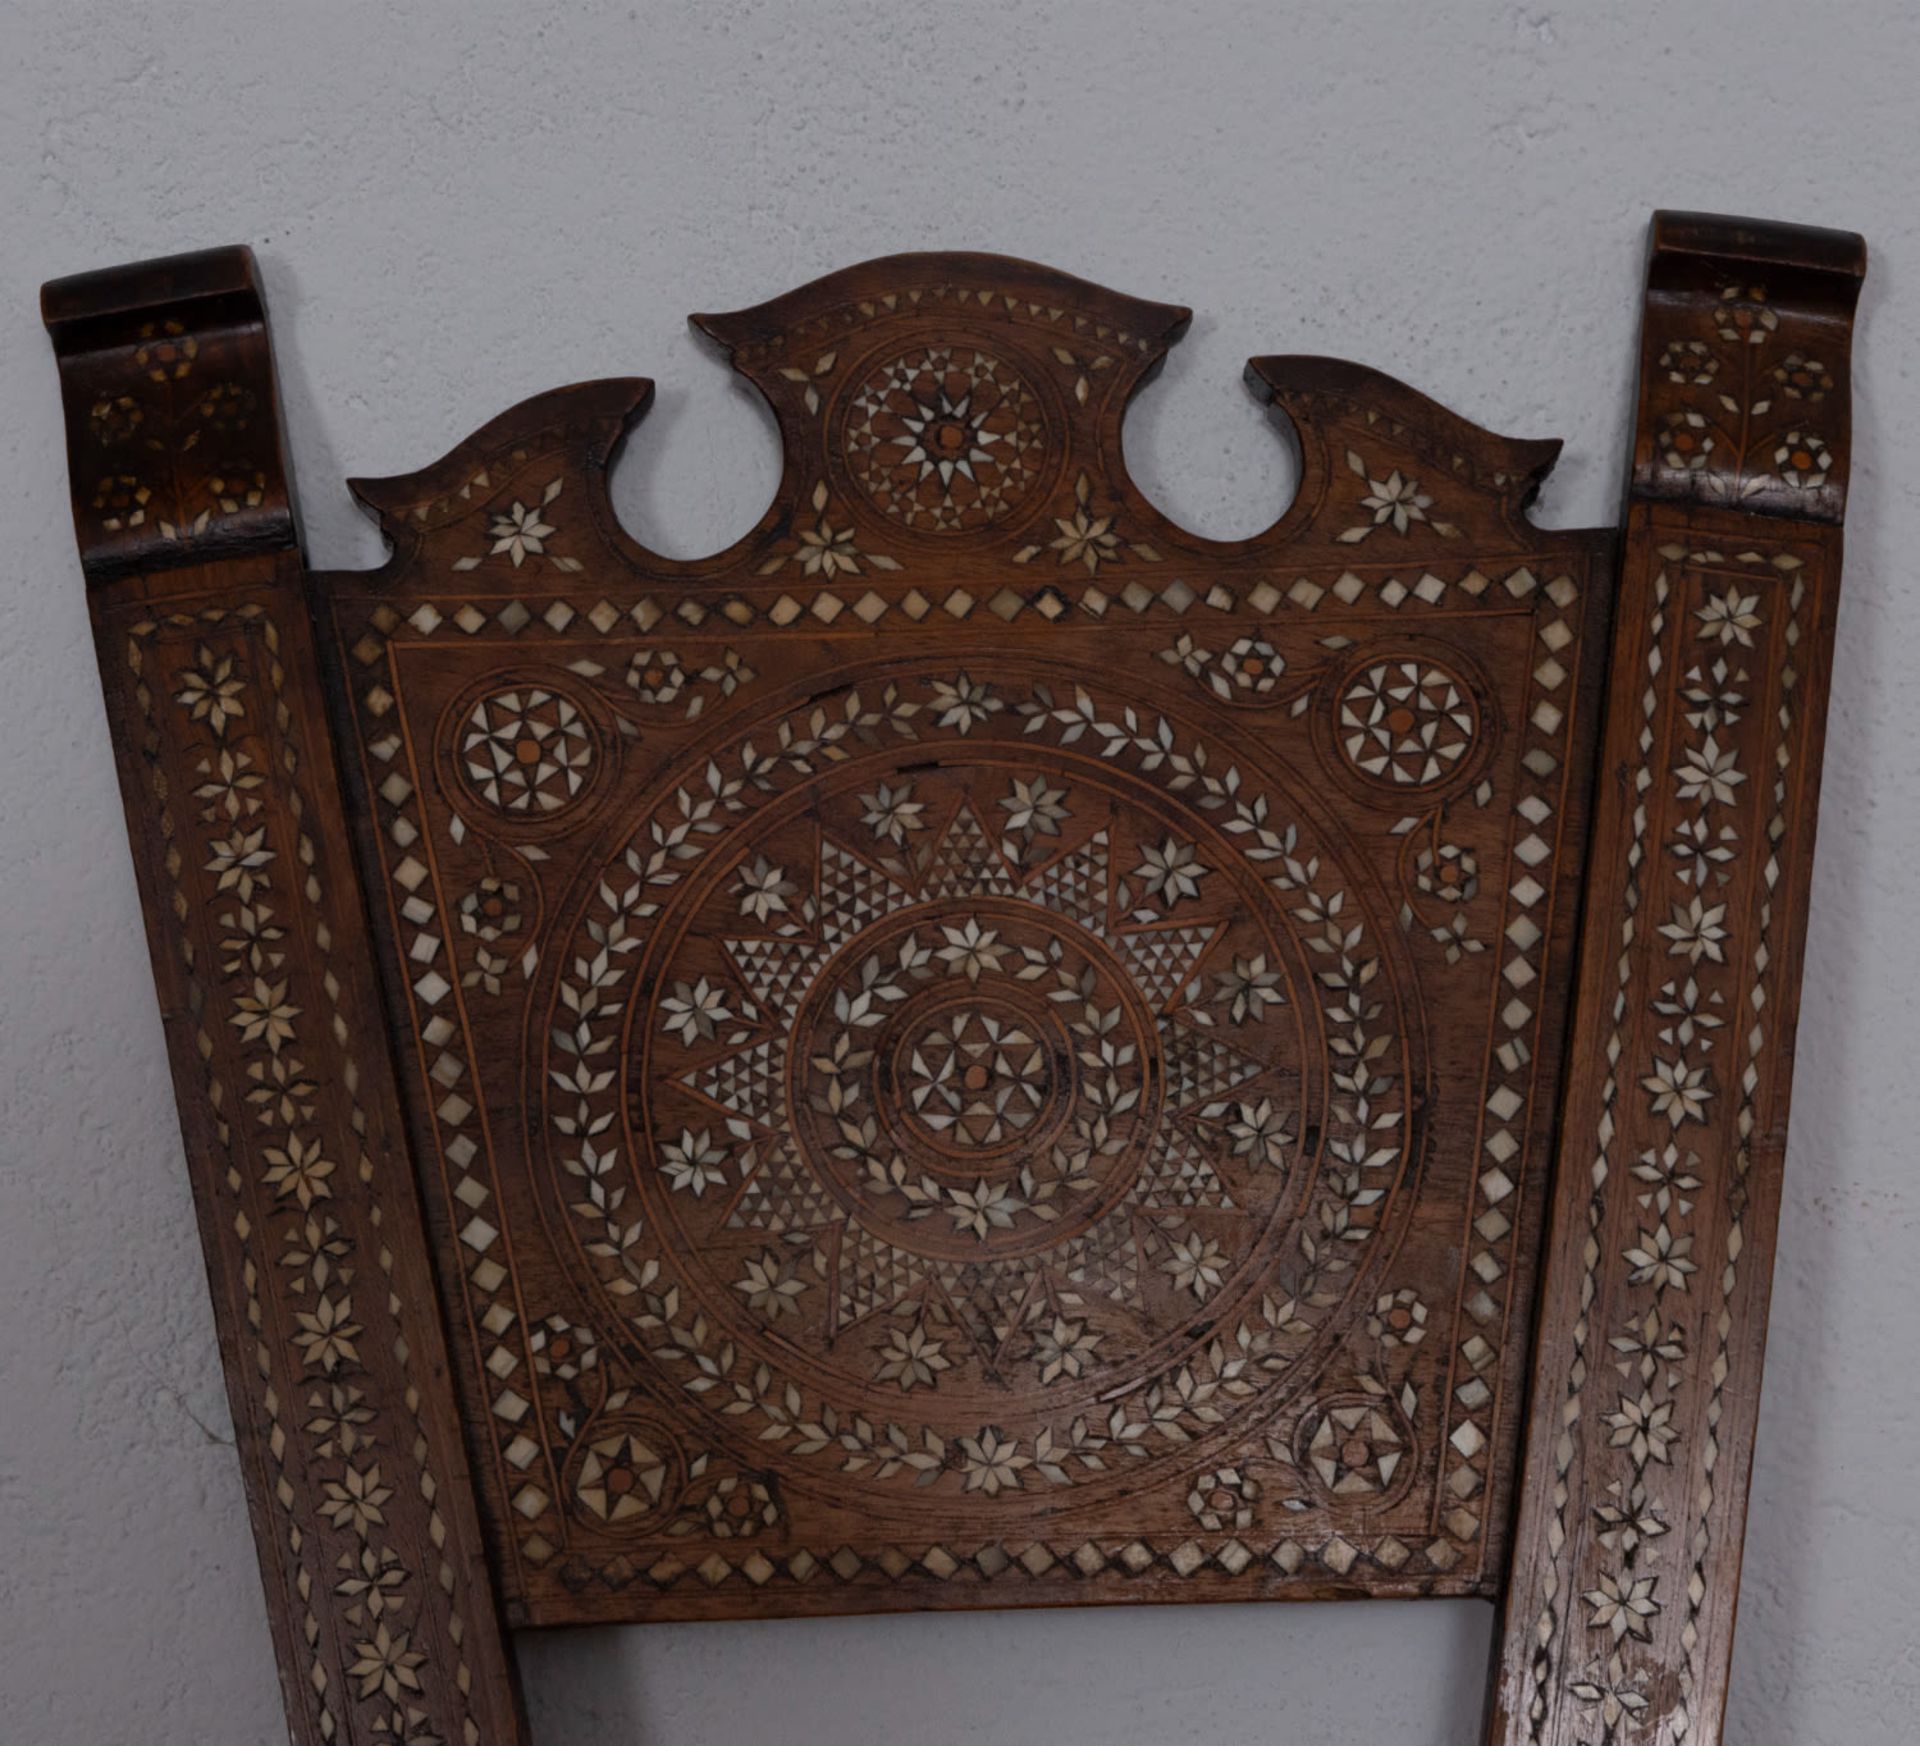 Lot of six chairs with bone inlays with geometric and floral decoration, 19th century - Bild 2 aus 4